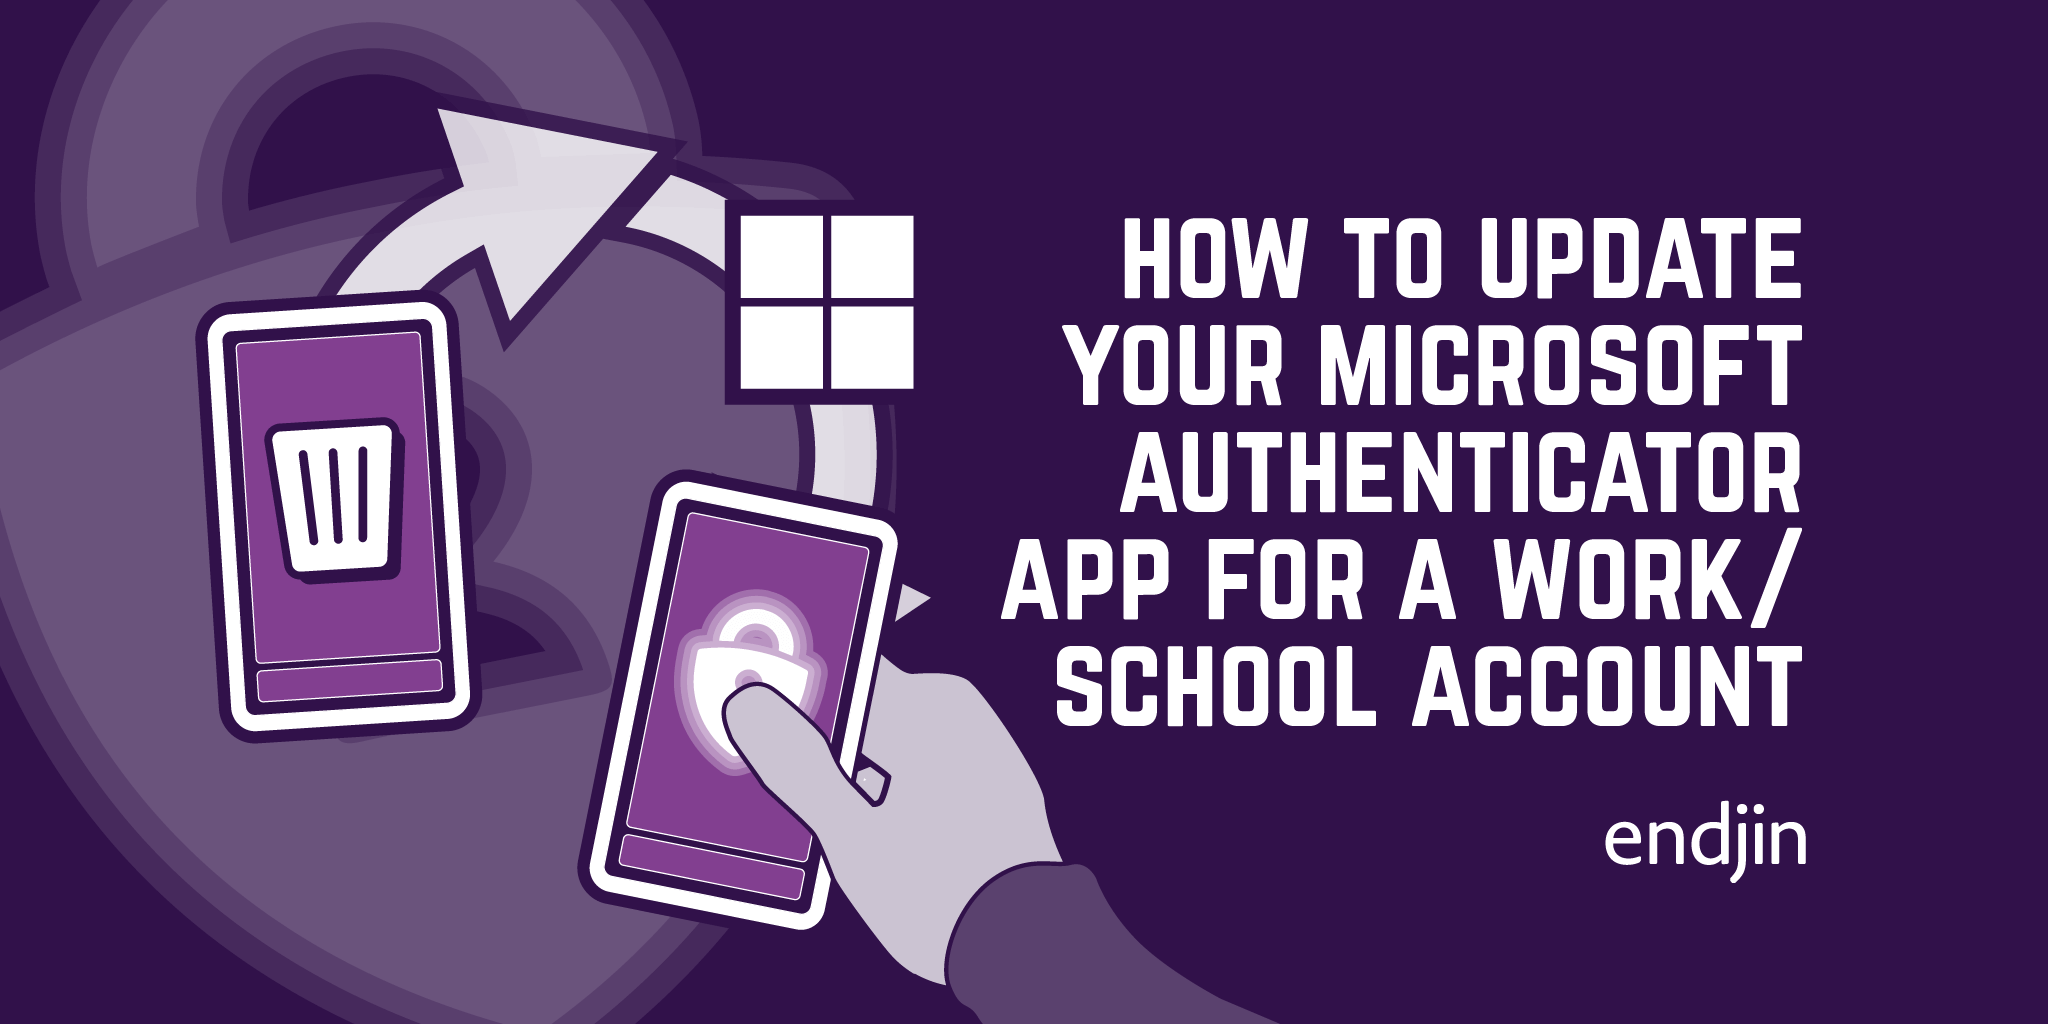 How to update your Microsoft Authenticator App for a work/school account